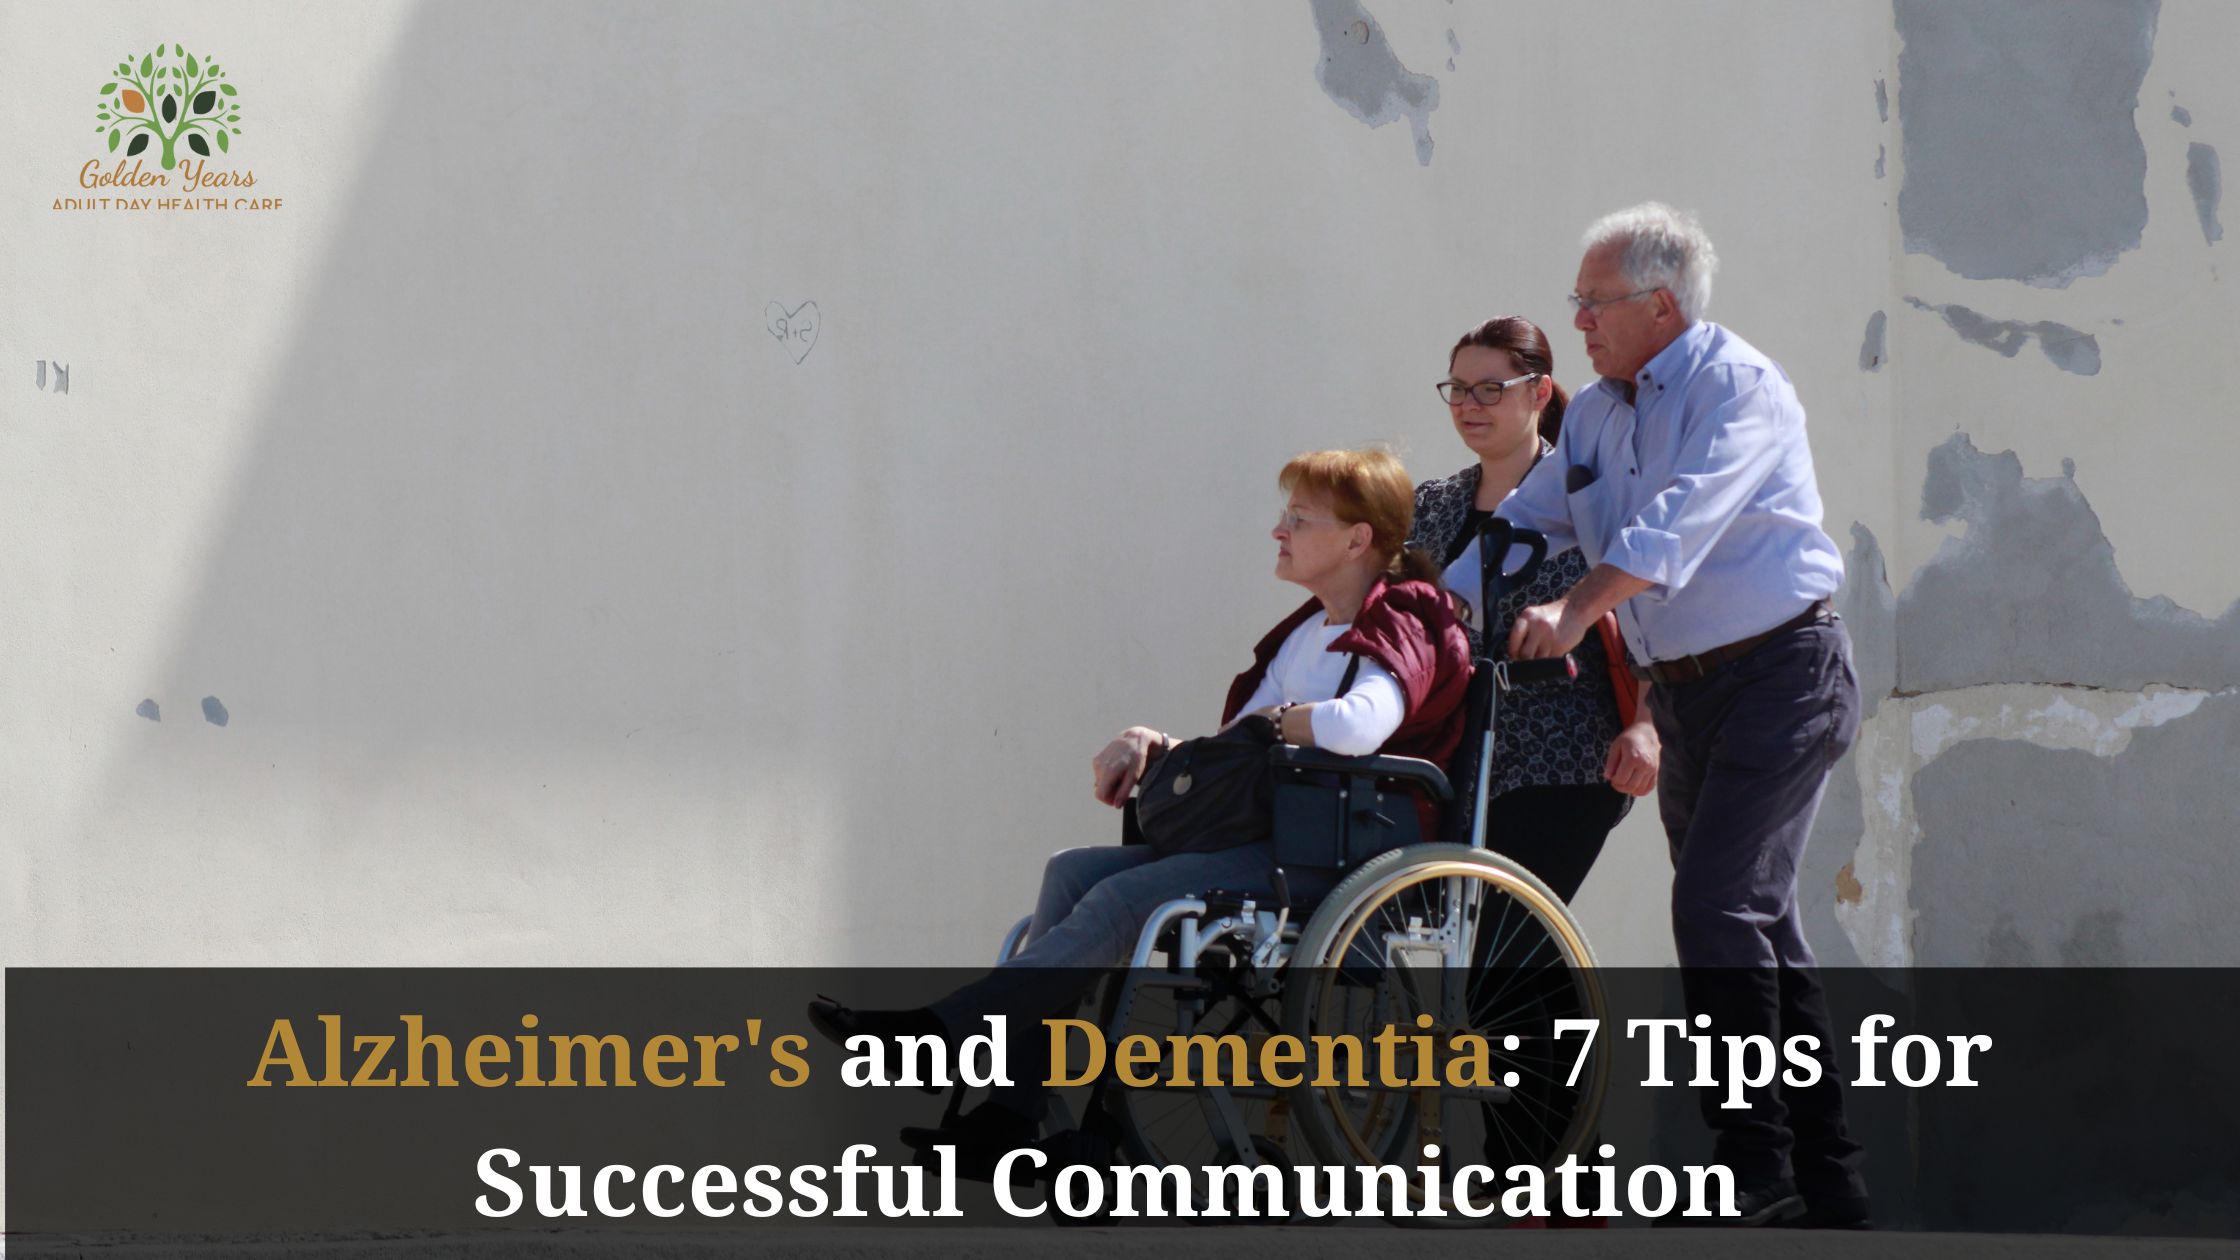 Alzheimer's and dementia: 7 Tips for successful communication